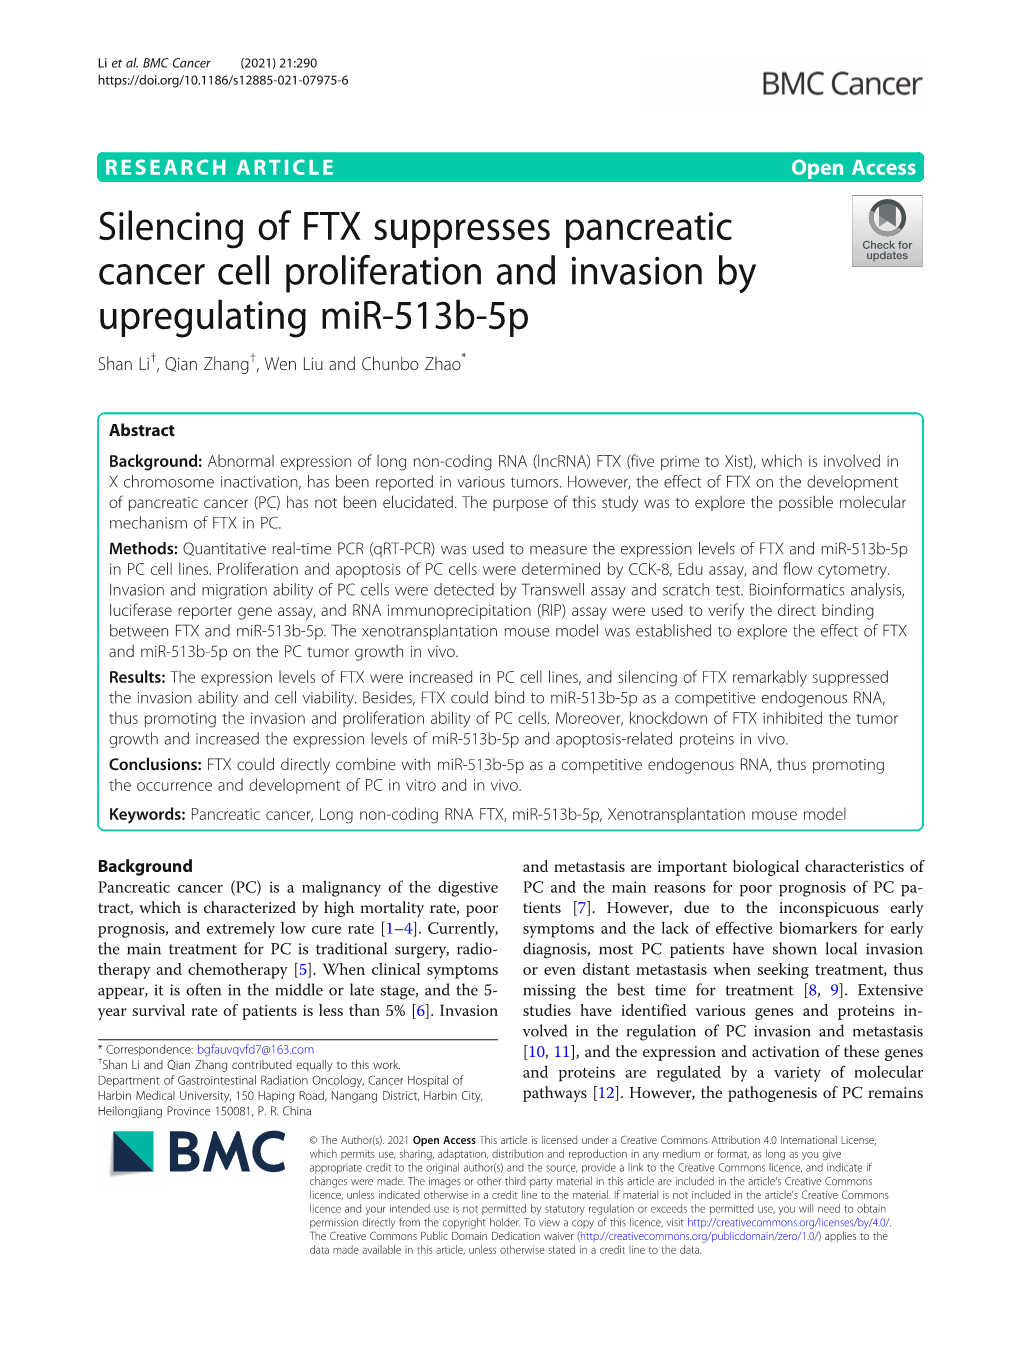 Silencing of FTX Suppresses Pancreatic Cancer Cell Proliferation and Invasion by Upregulating Mir-513B-5P Shan Li†, Qian Zhang†, Wen Liu and Chunbo Zhao*